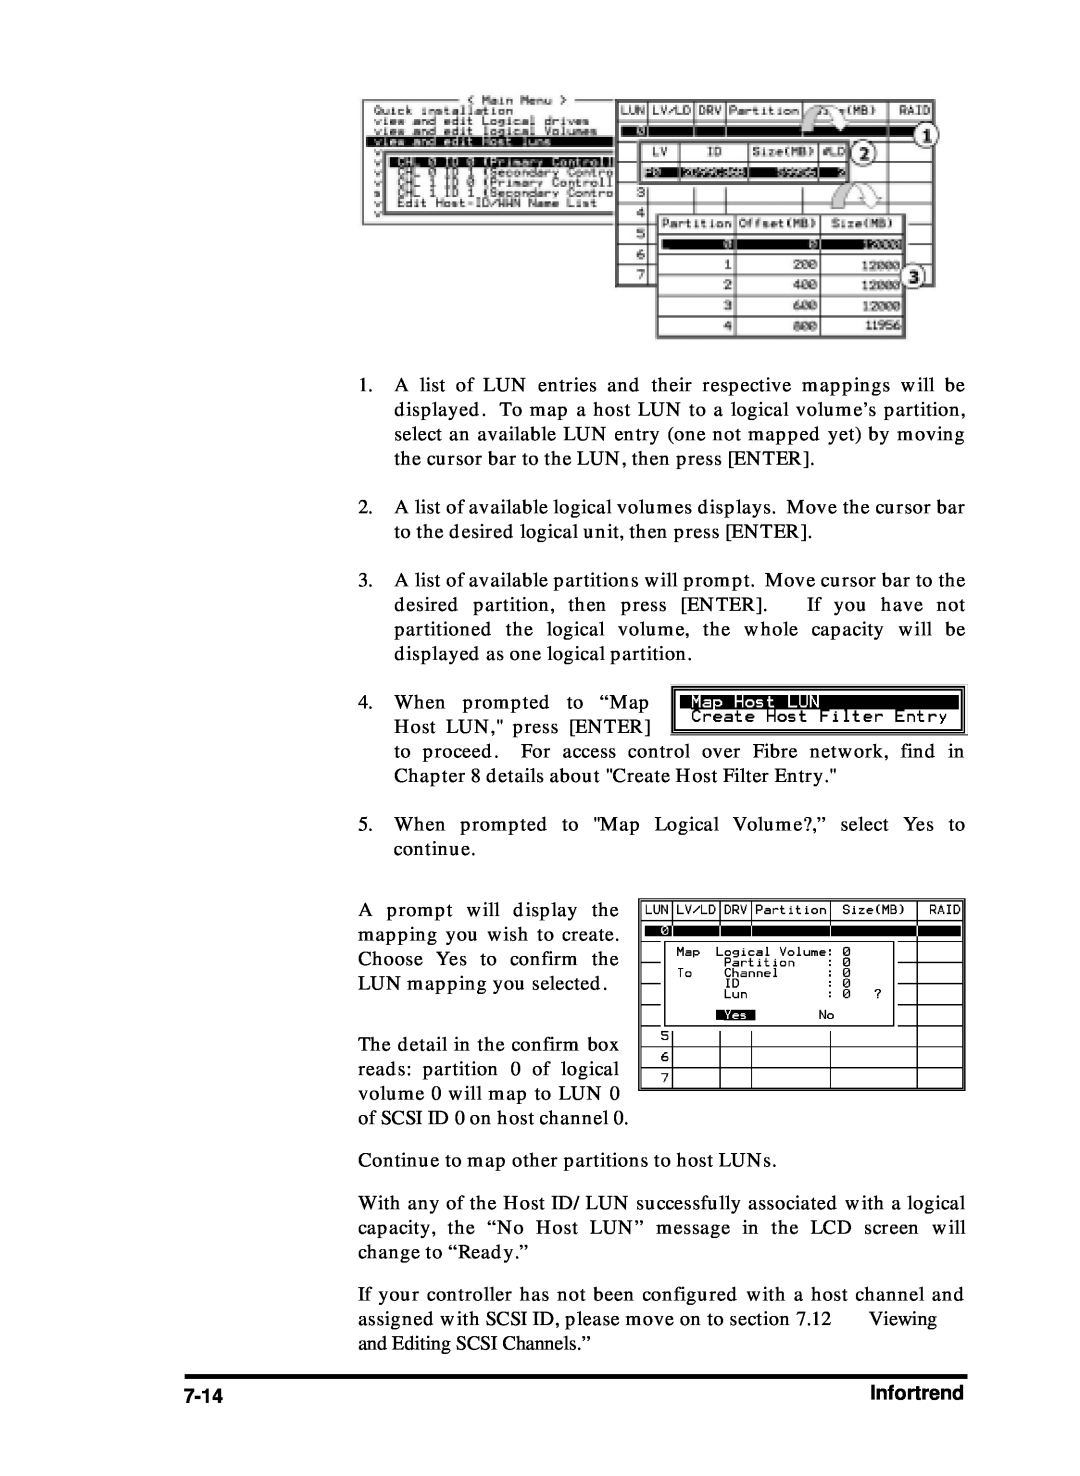 Compaq Infortrend manual When prompted to “Map Host LUN, press ENTER 